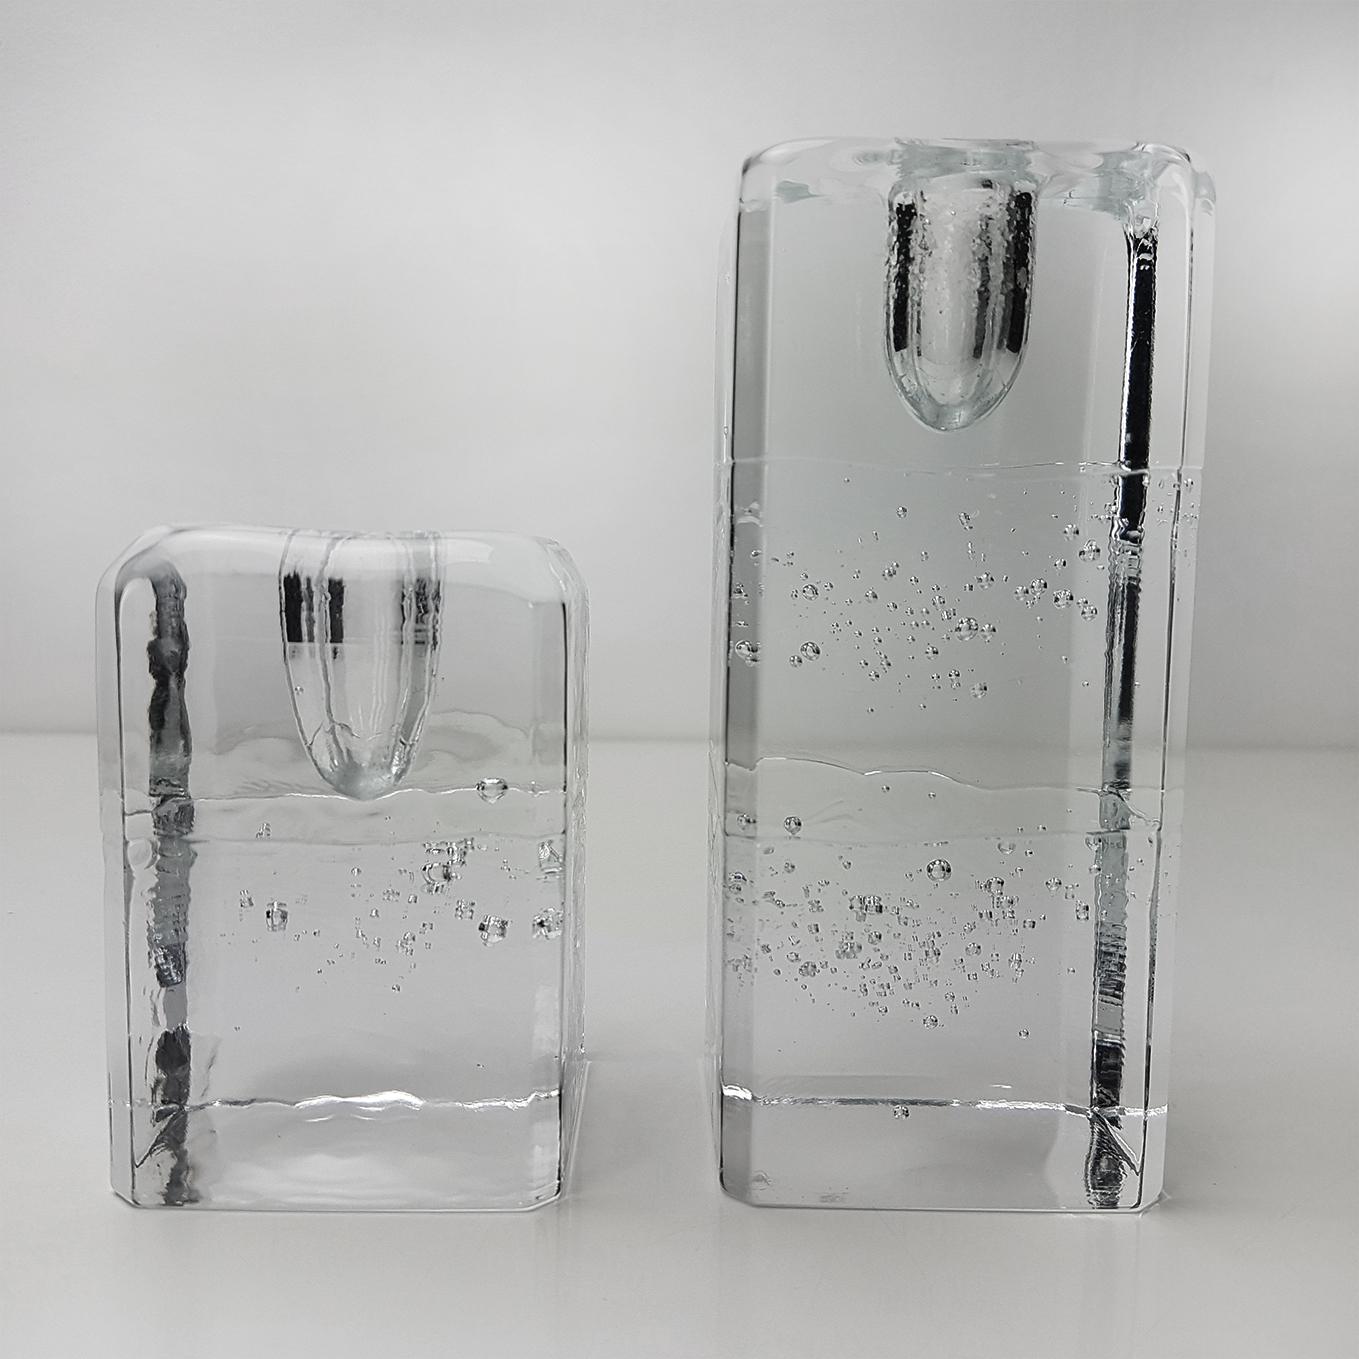 This pair of square candleholders designed by Timo Sarpaneva for Iittala, Finland are heavy, substantial and gorgeous. With large and small suspended bubbles and wrinkled glass, they look as if they are chiseled from a solid block of ice. Inspired